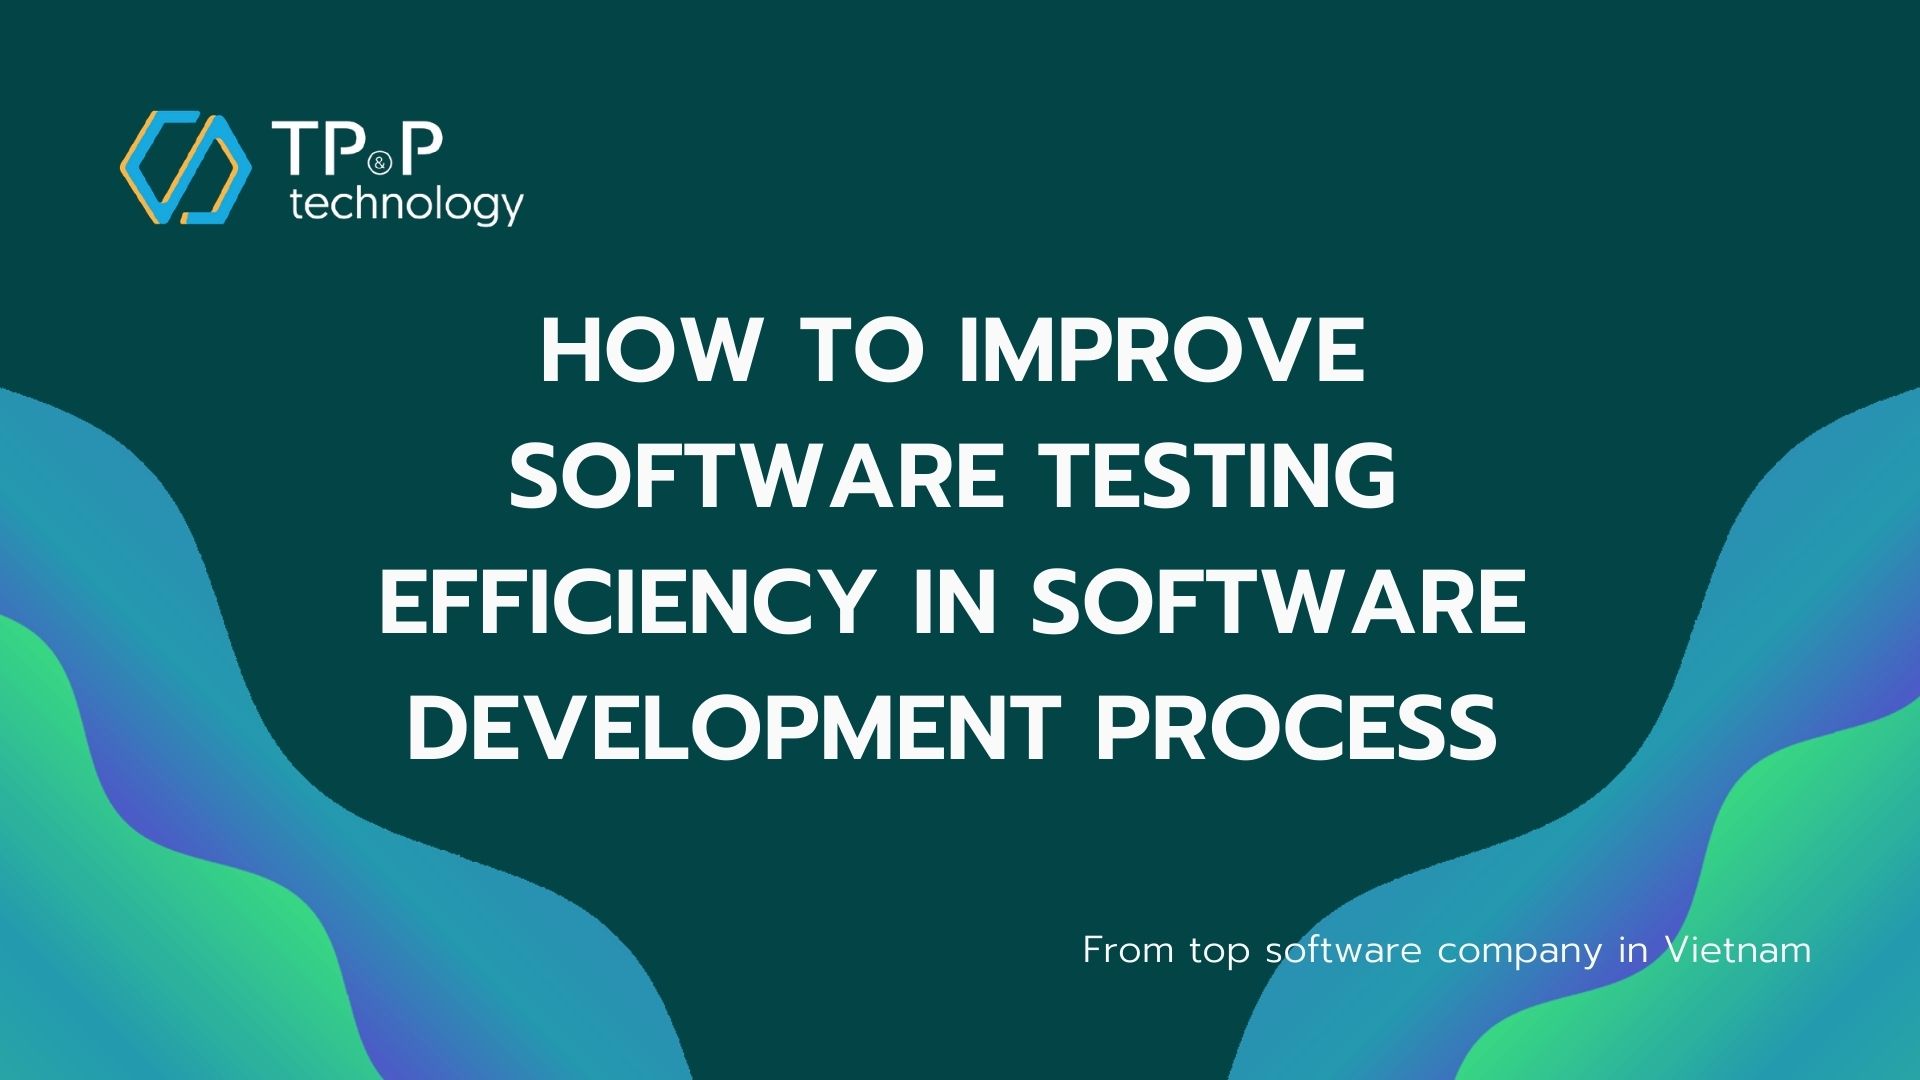 How To Improve Software Testing Efficiency In Software Development Process